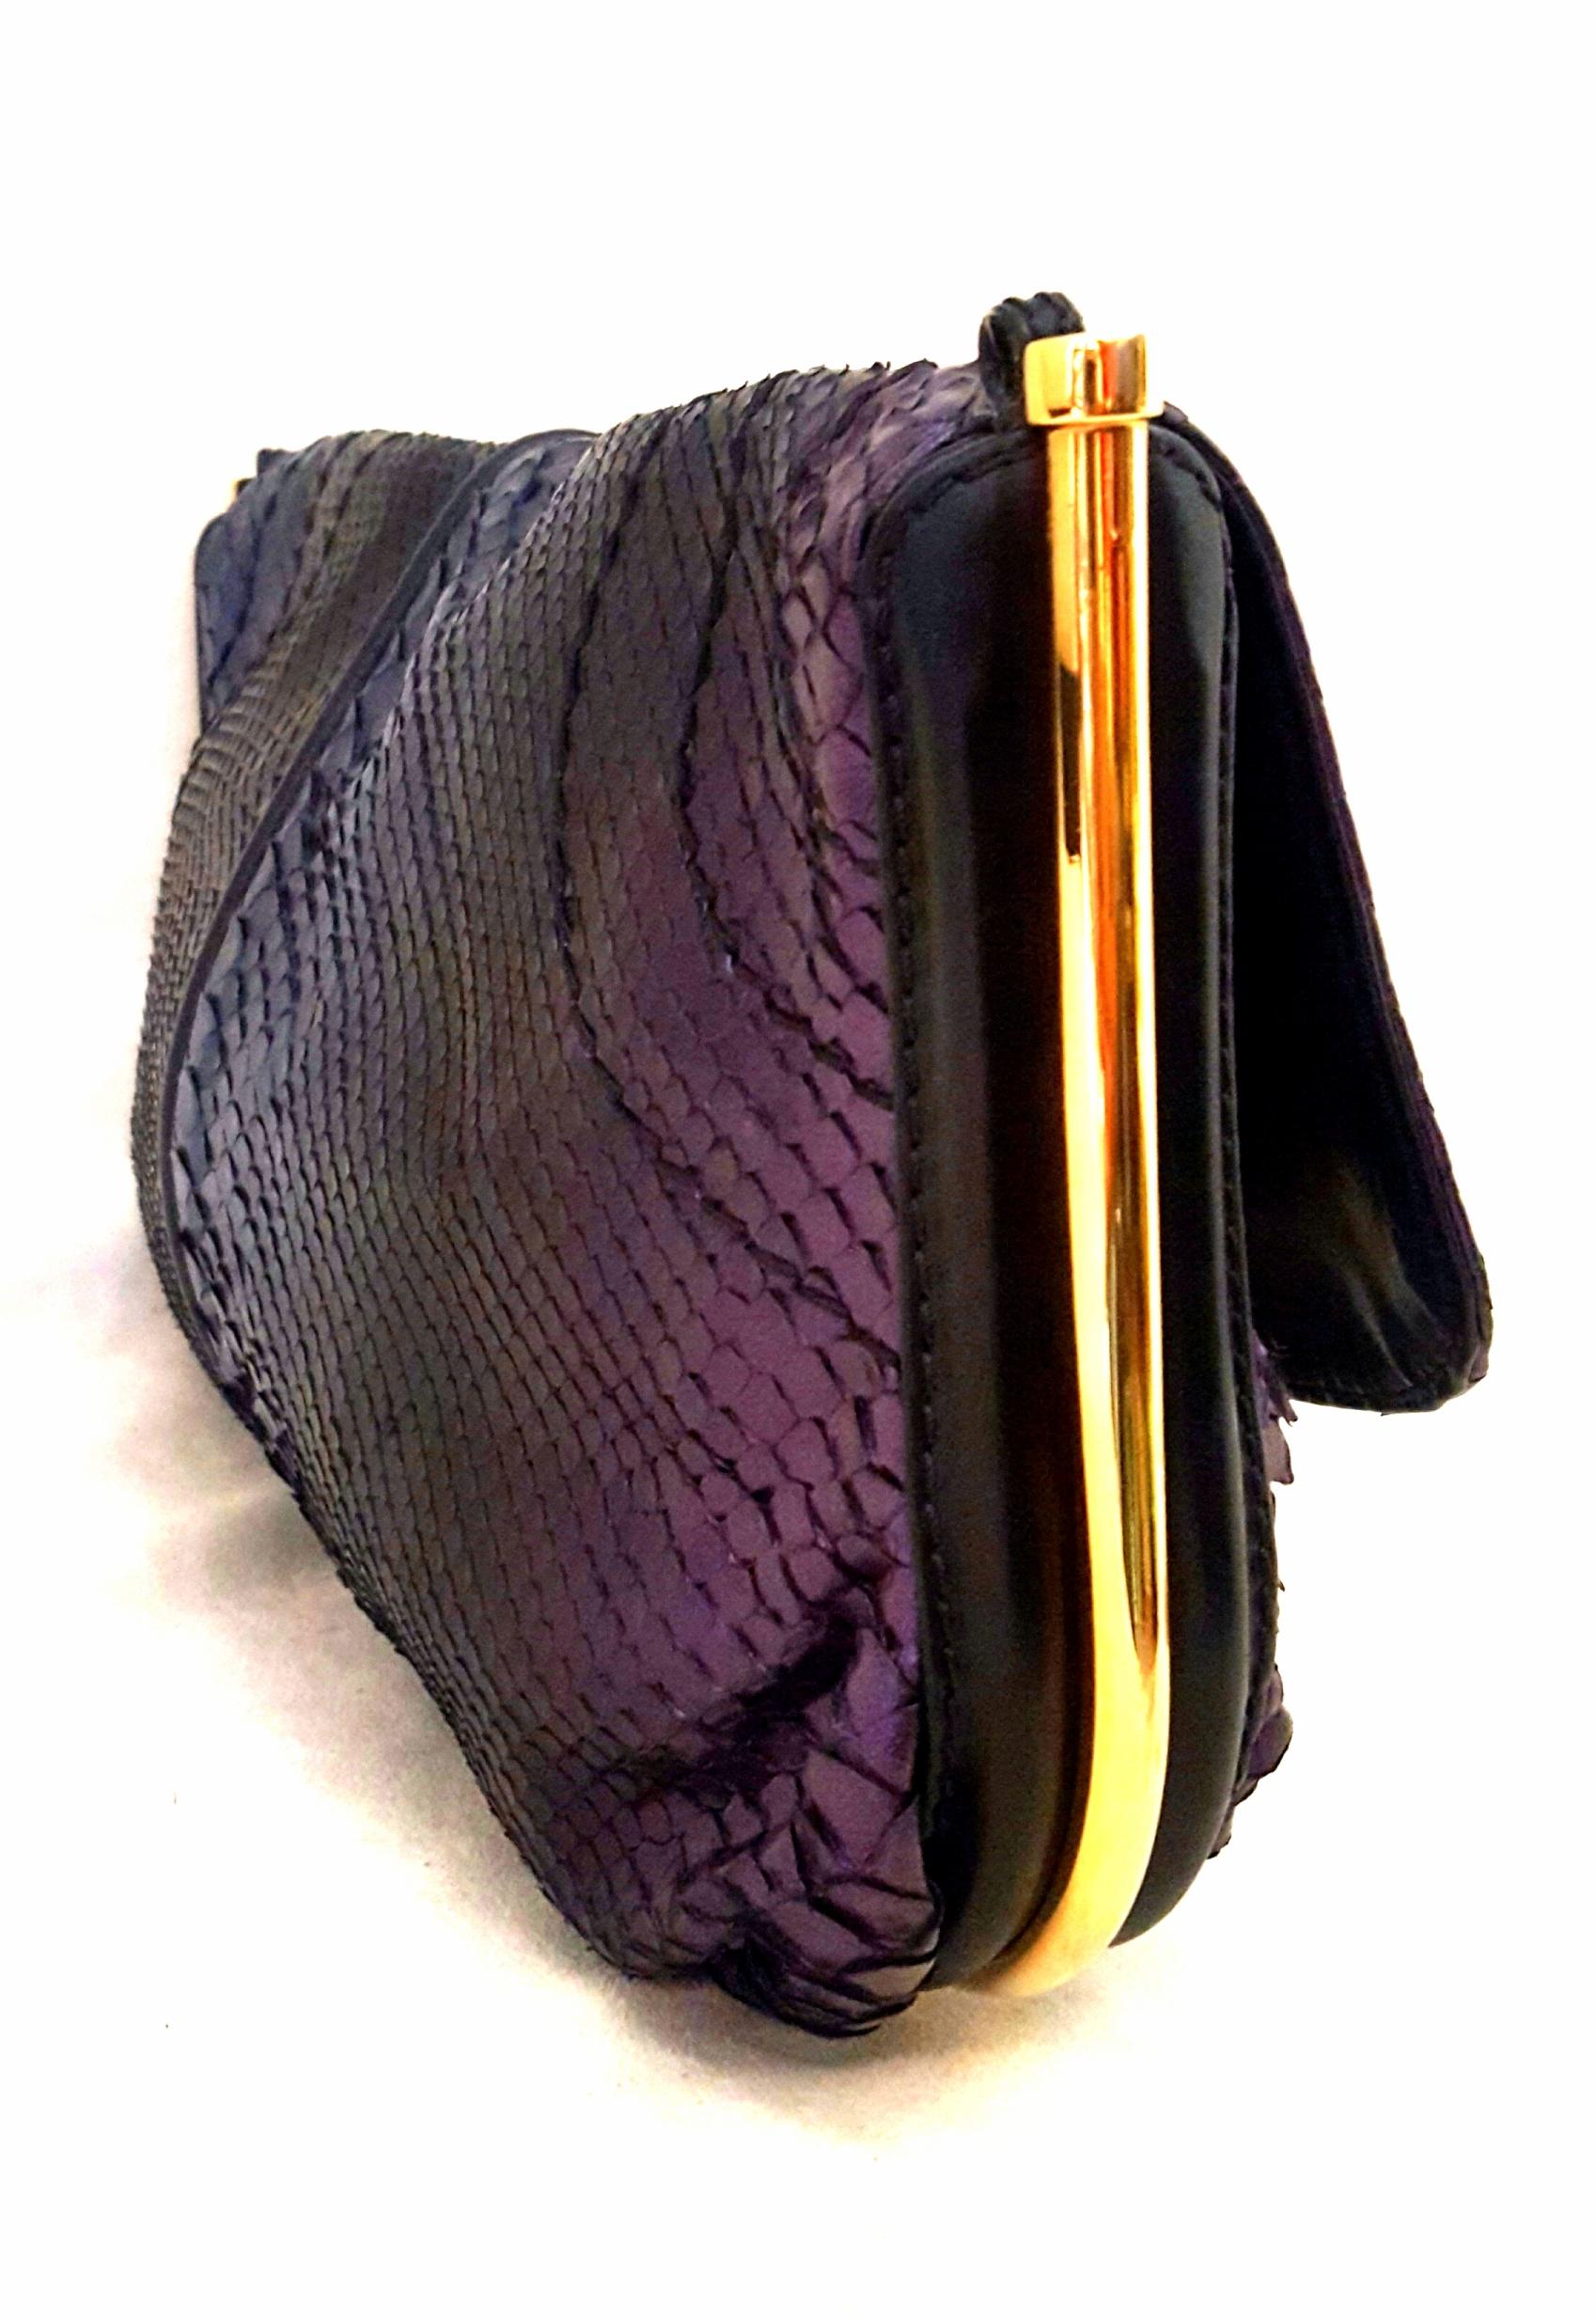 Jimmy Choo blue and purple ombre effect metallic python shoulder bag is dramatically accentuated with multiple decorations throughout. This bag features gold tone hardware, that includes the chain link shoulder strap and the contouring metal rods